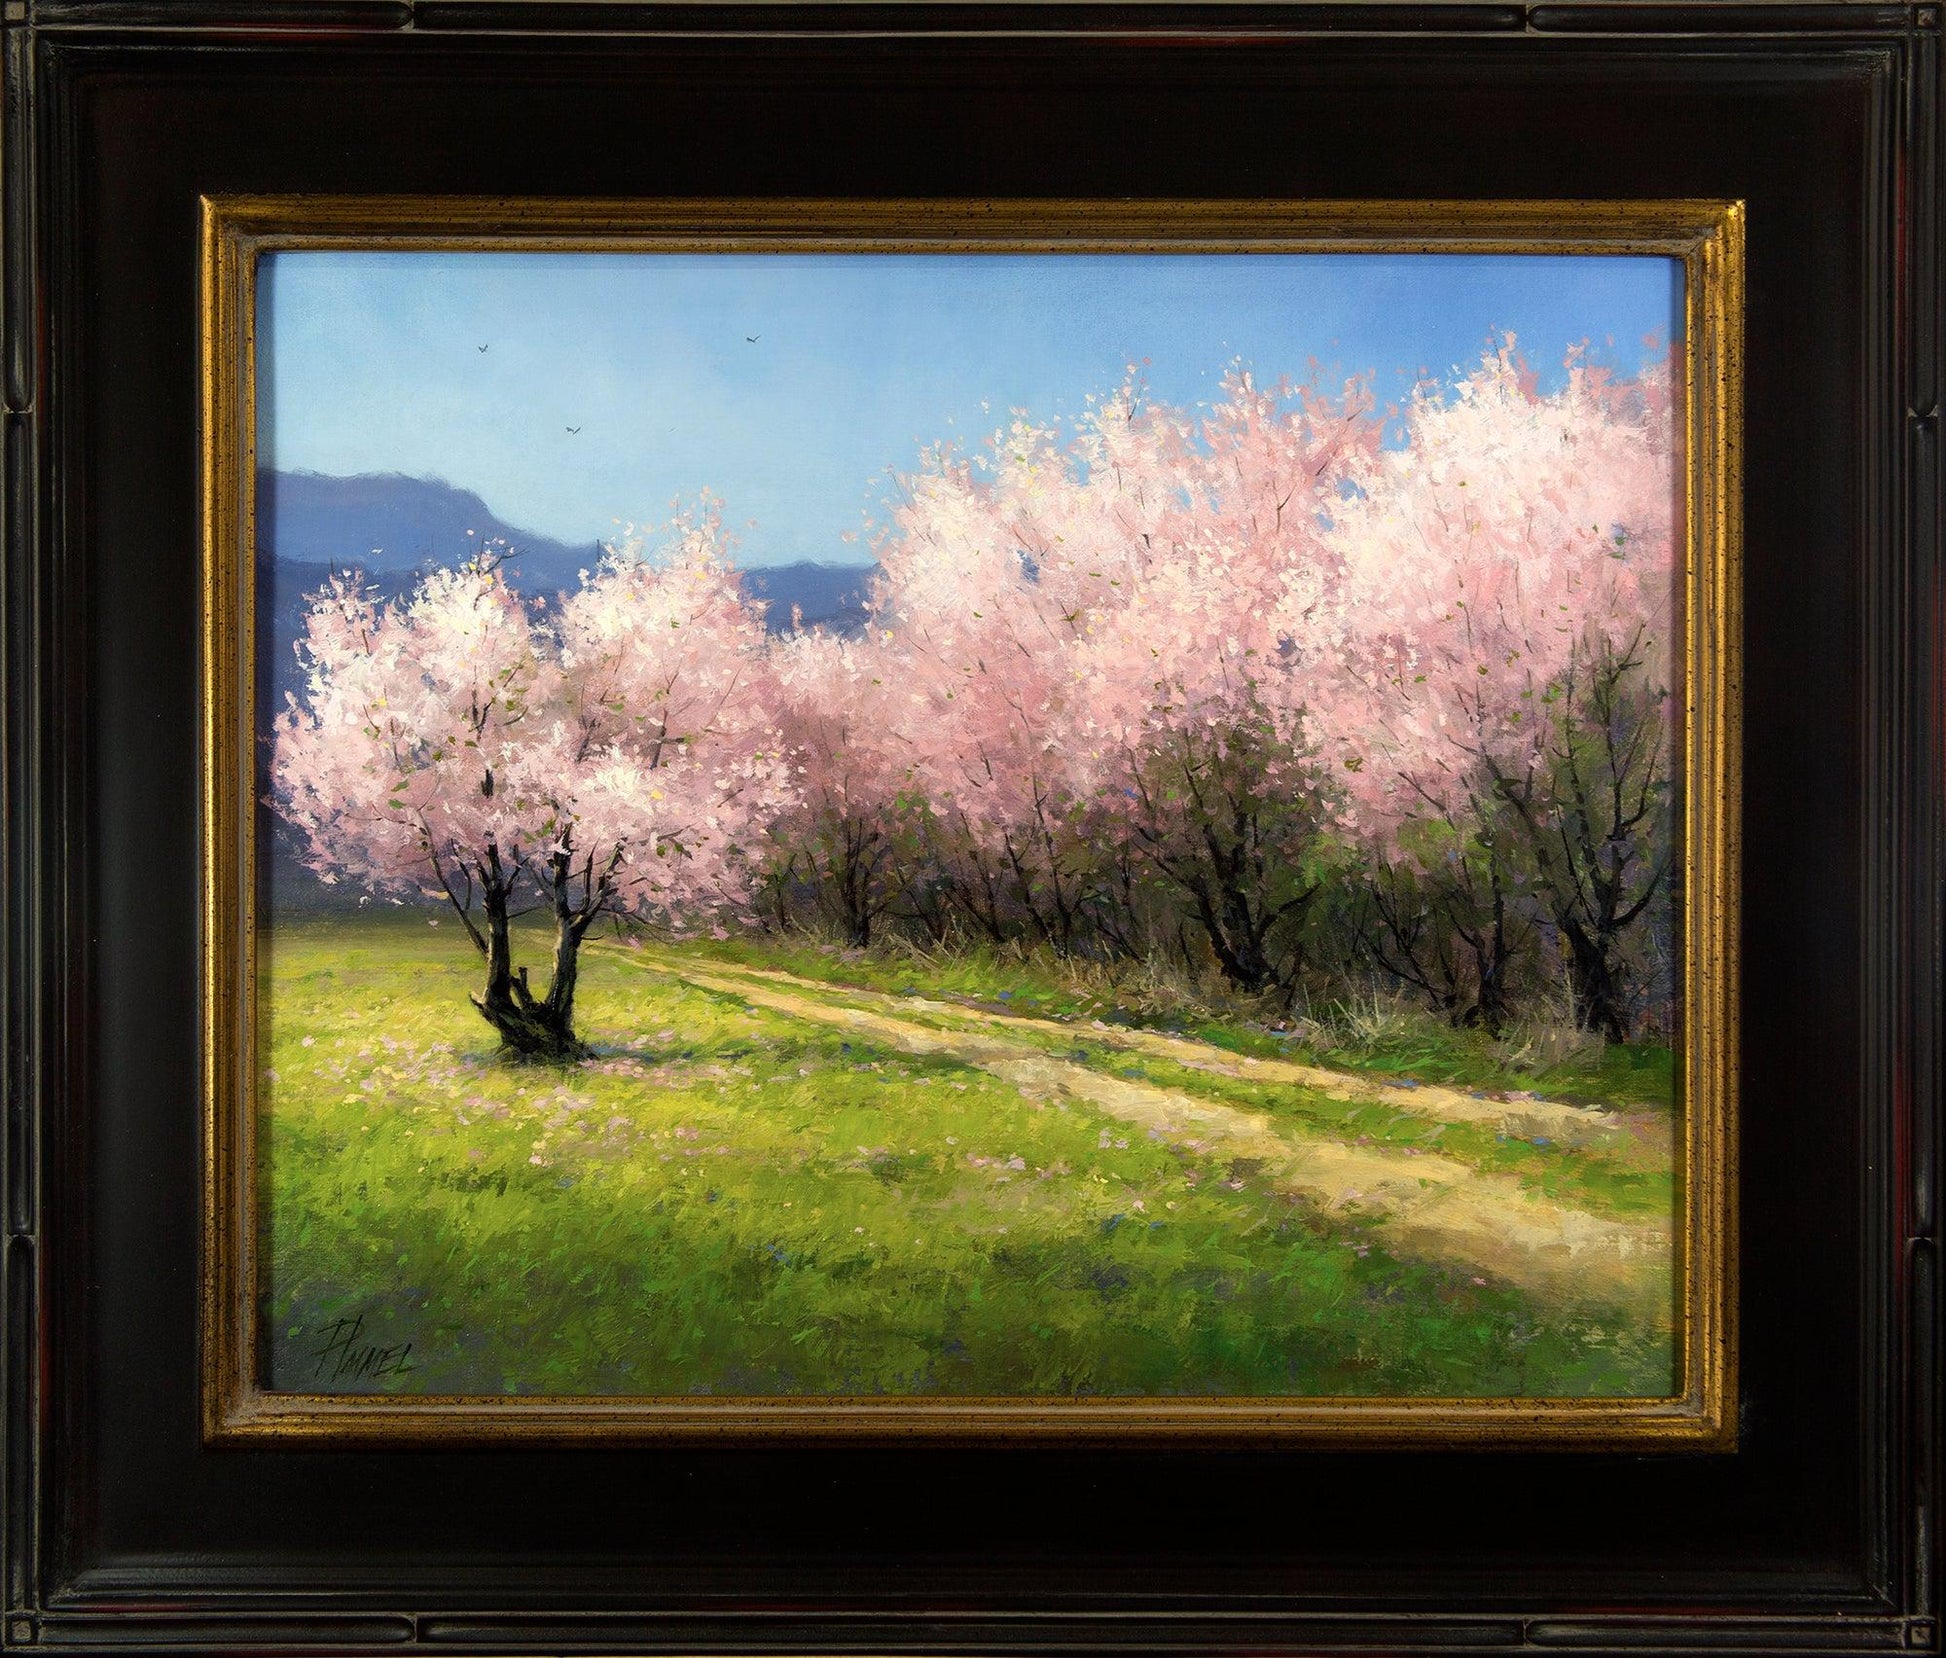 April Tapestry-Painting-Peggy Immel-Sorrel Sky Gallery